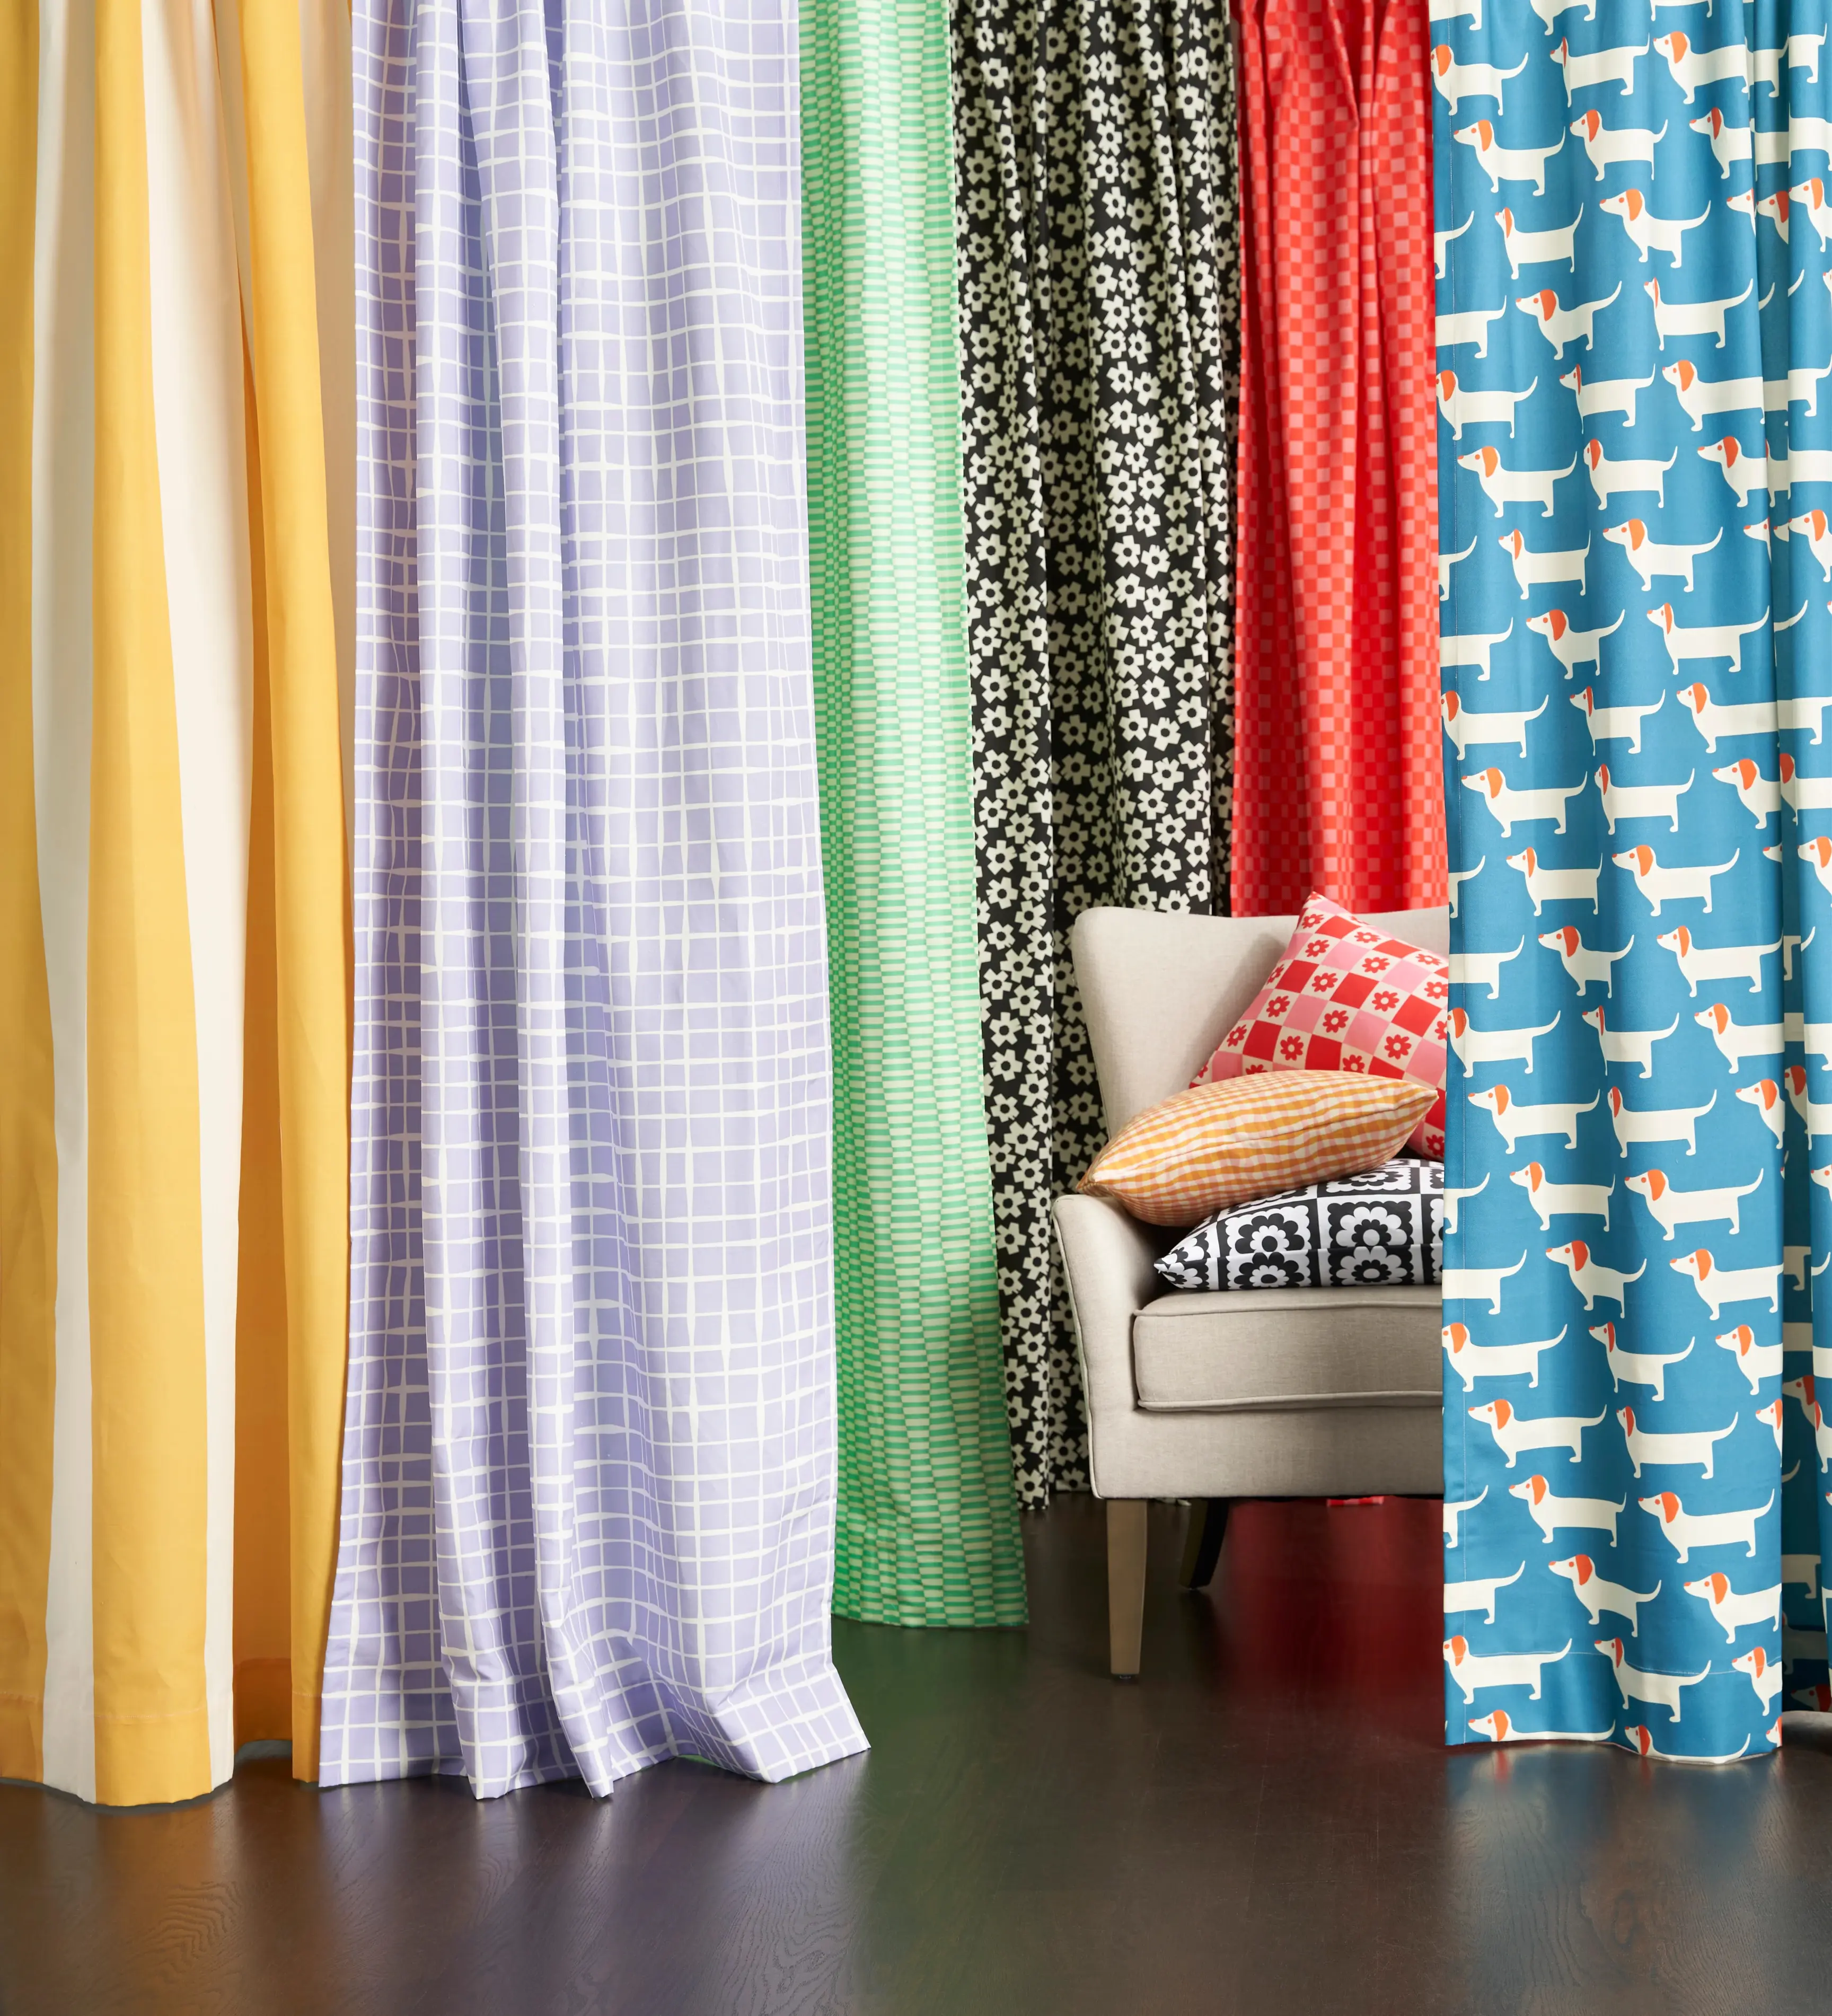 Colorful curtains with different patterns hanging